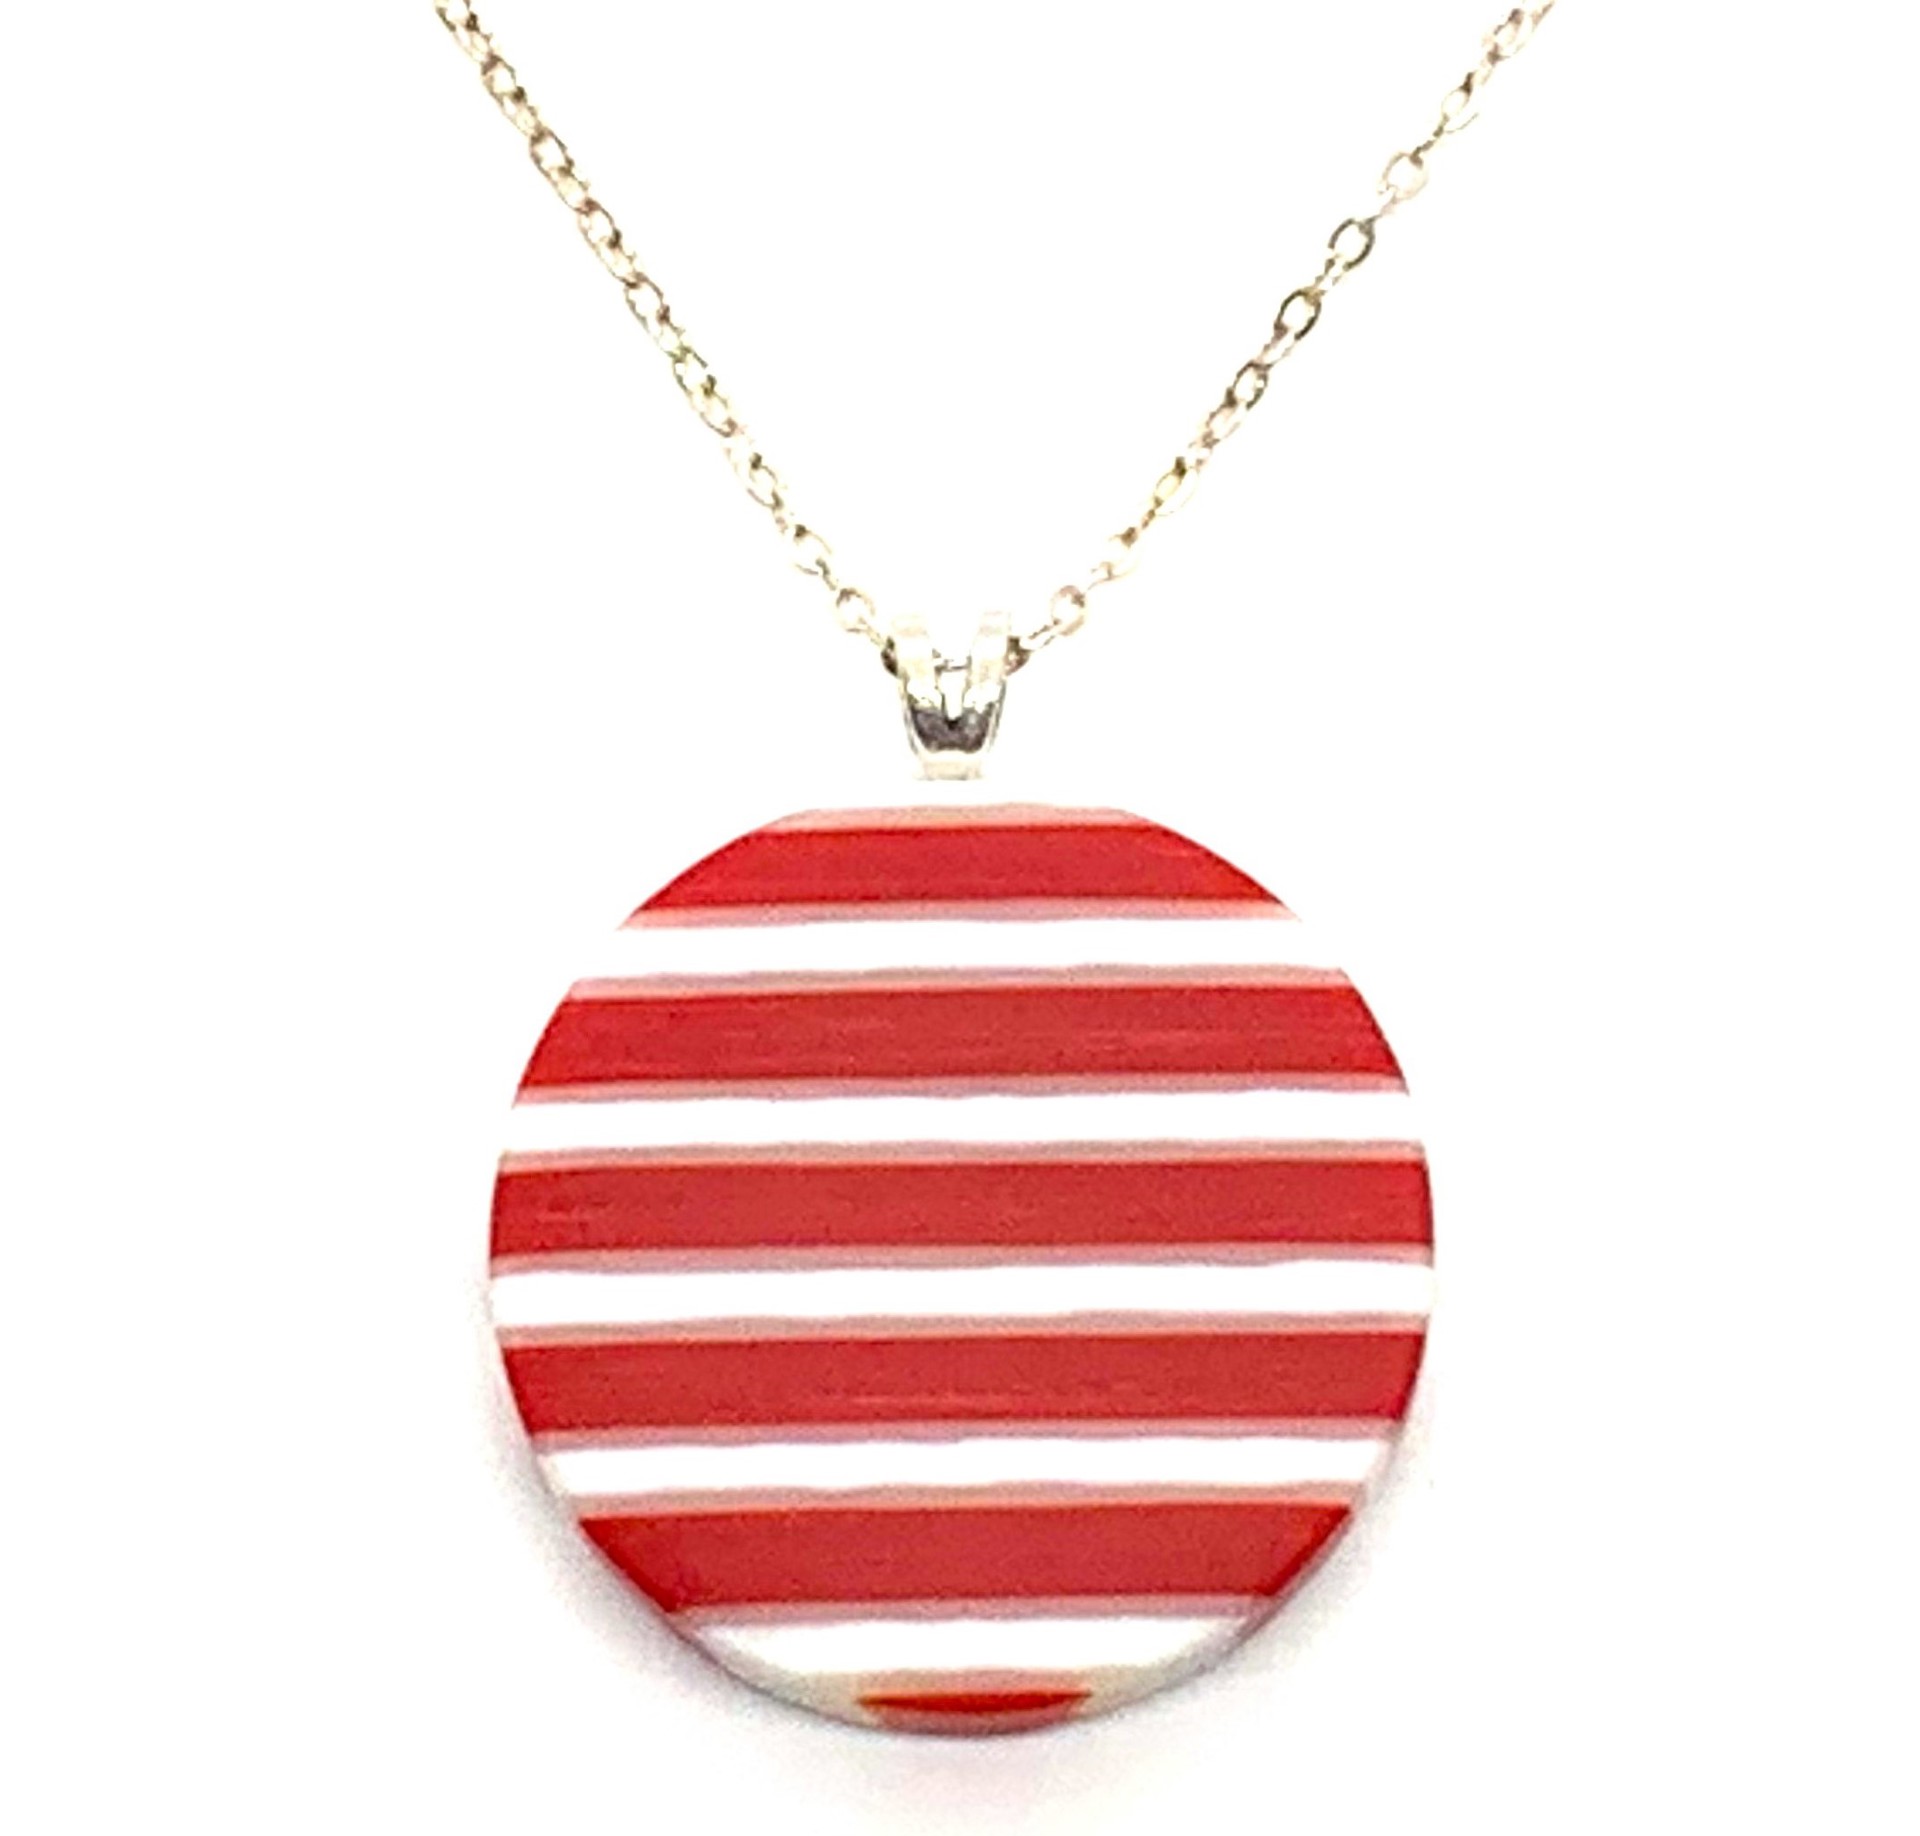 On Edge Necklace - Red/French Vanilla by Chris Cox